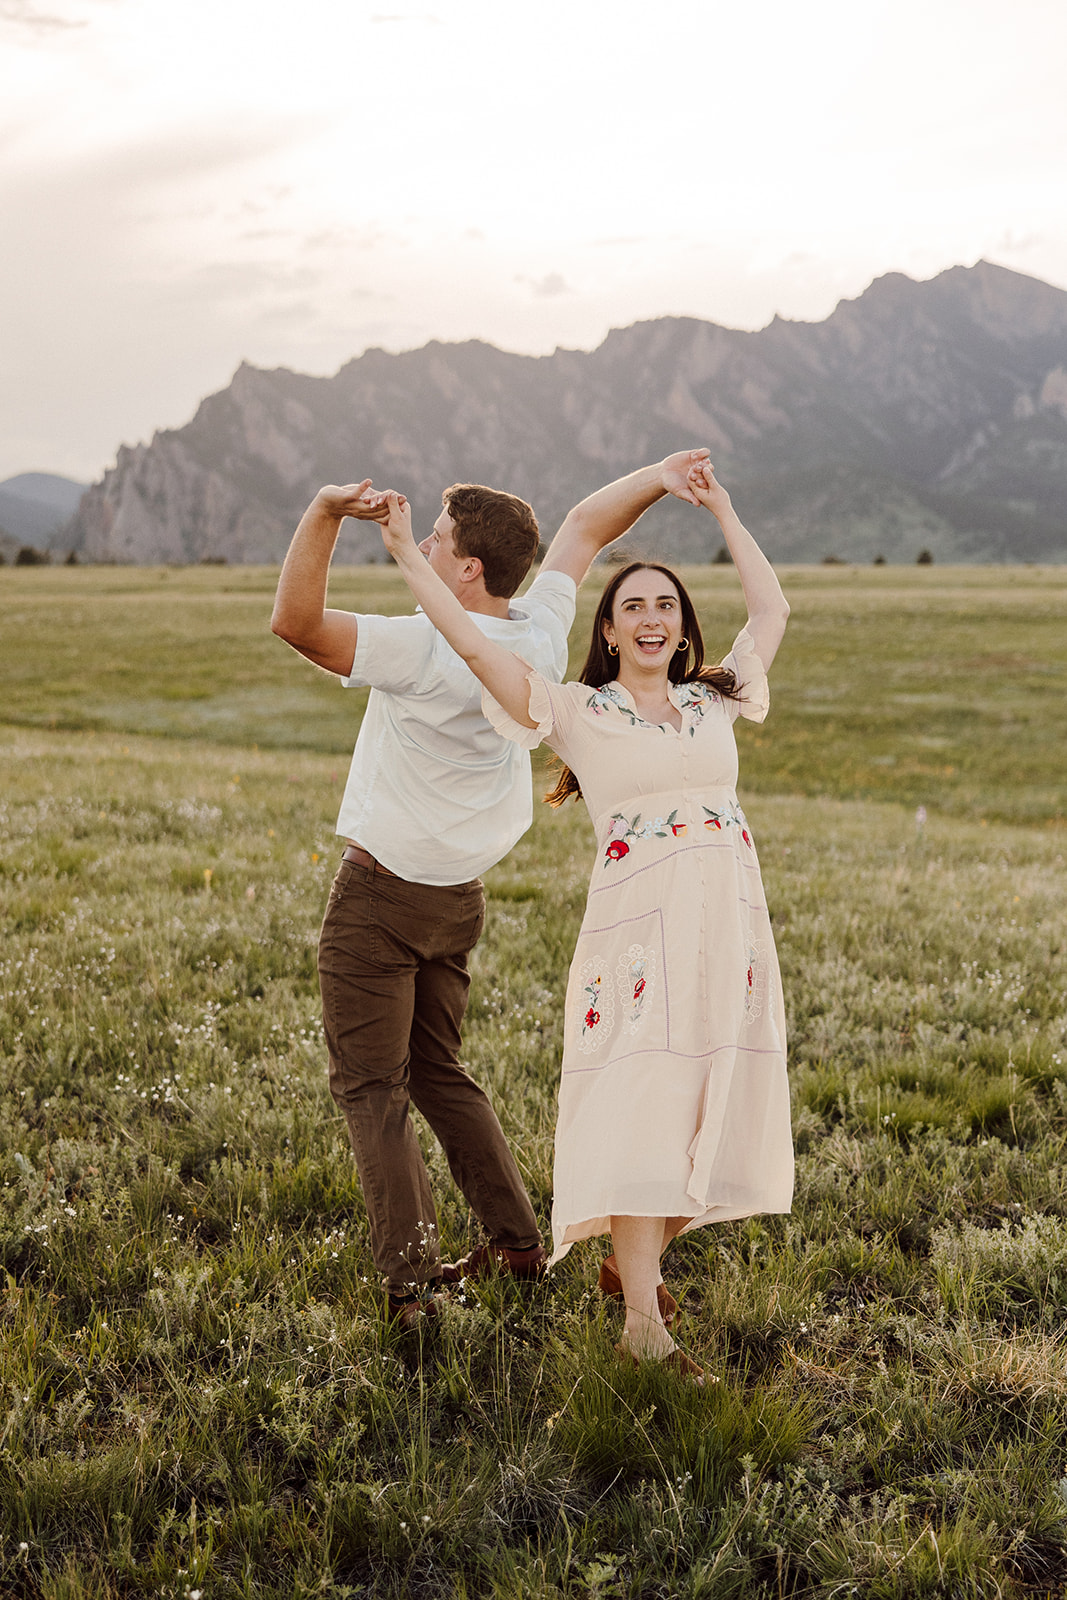 Man and woman twirling and dancing in front of picturesque mountains in Denver